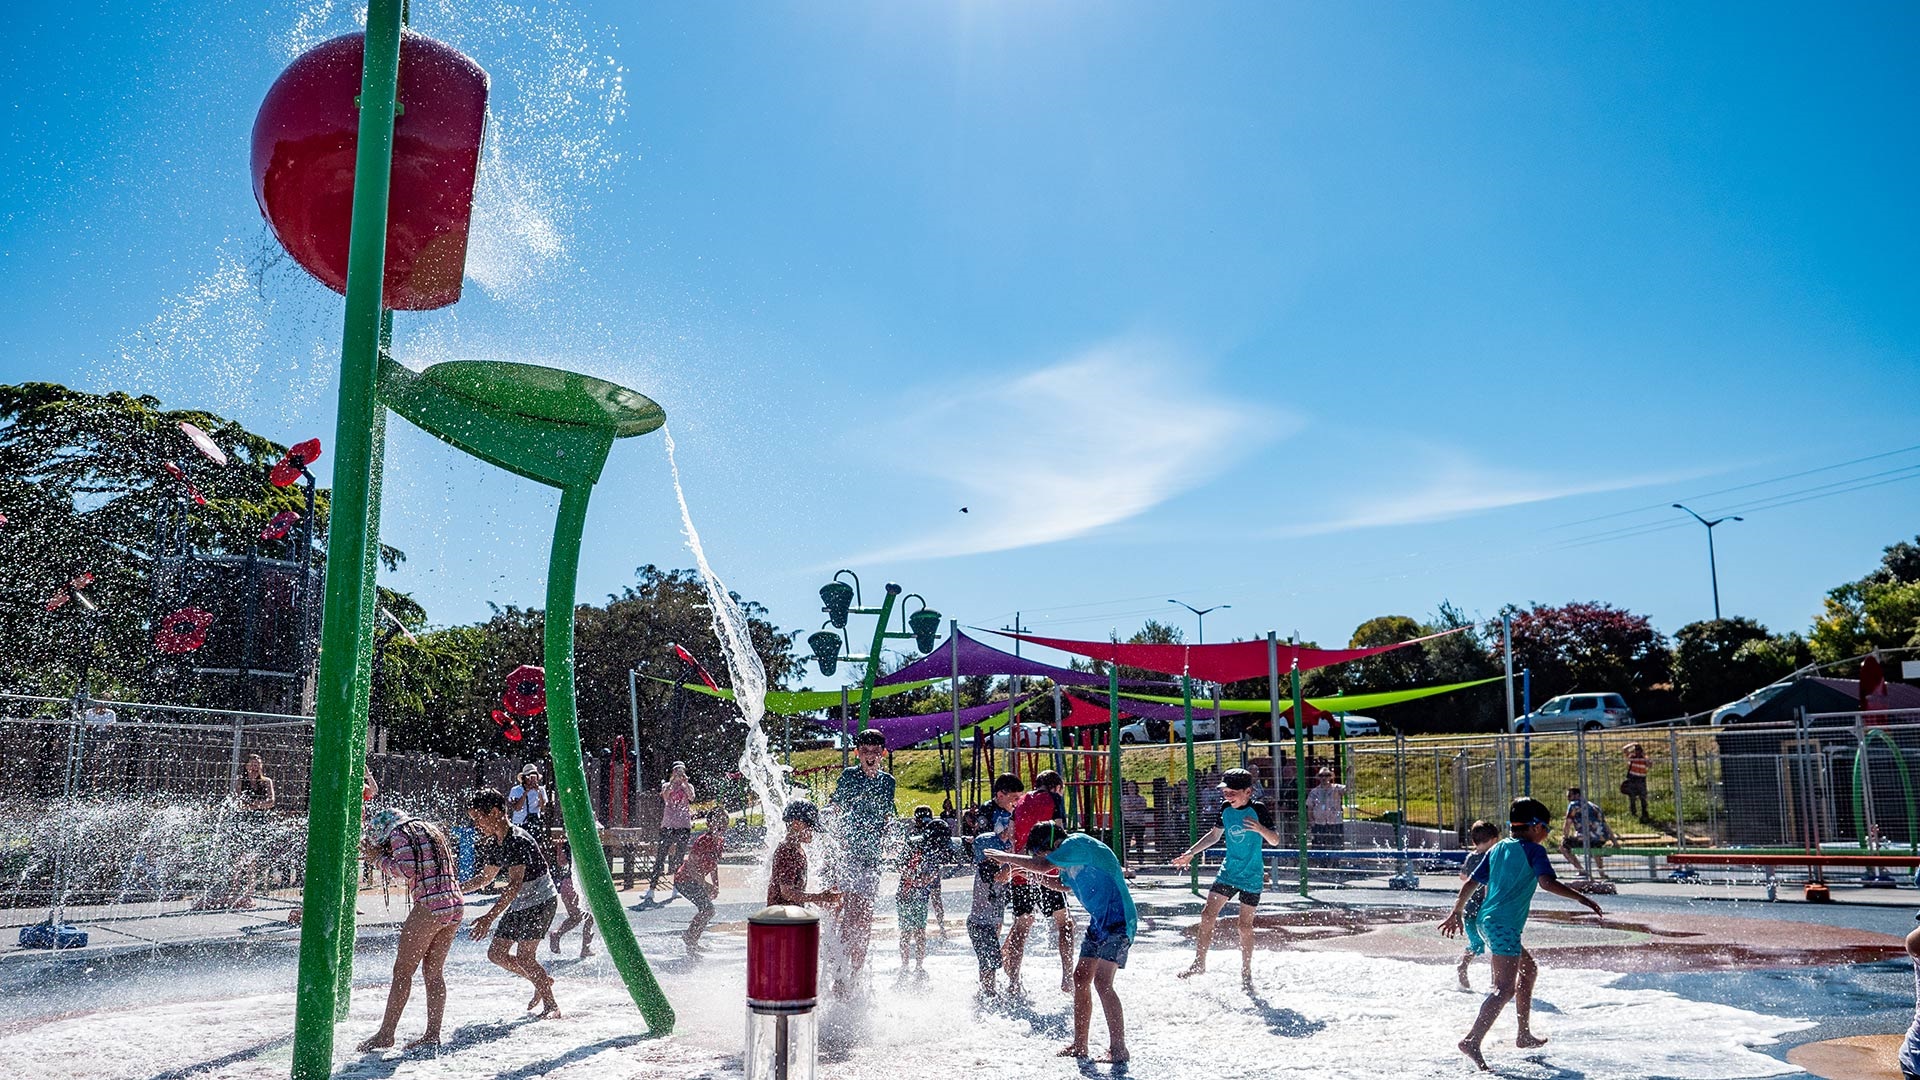 The image shows children playing at the splashpad under the sun.